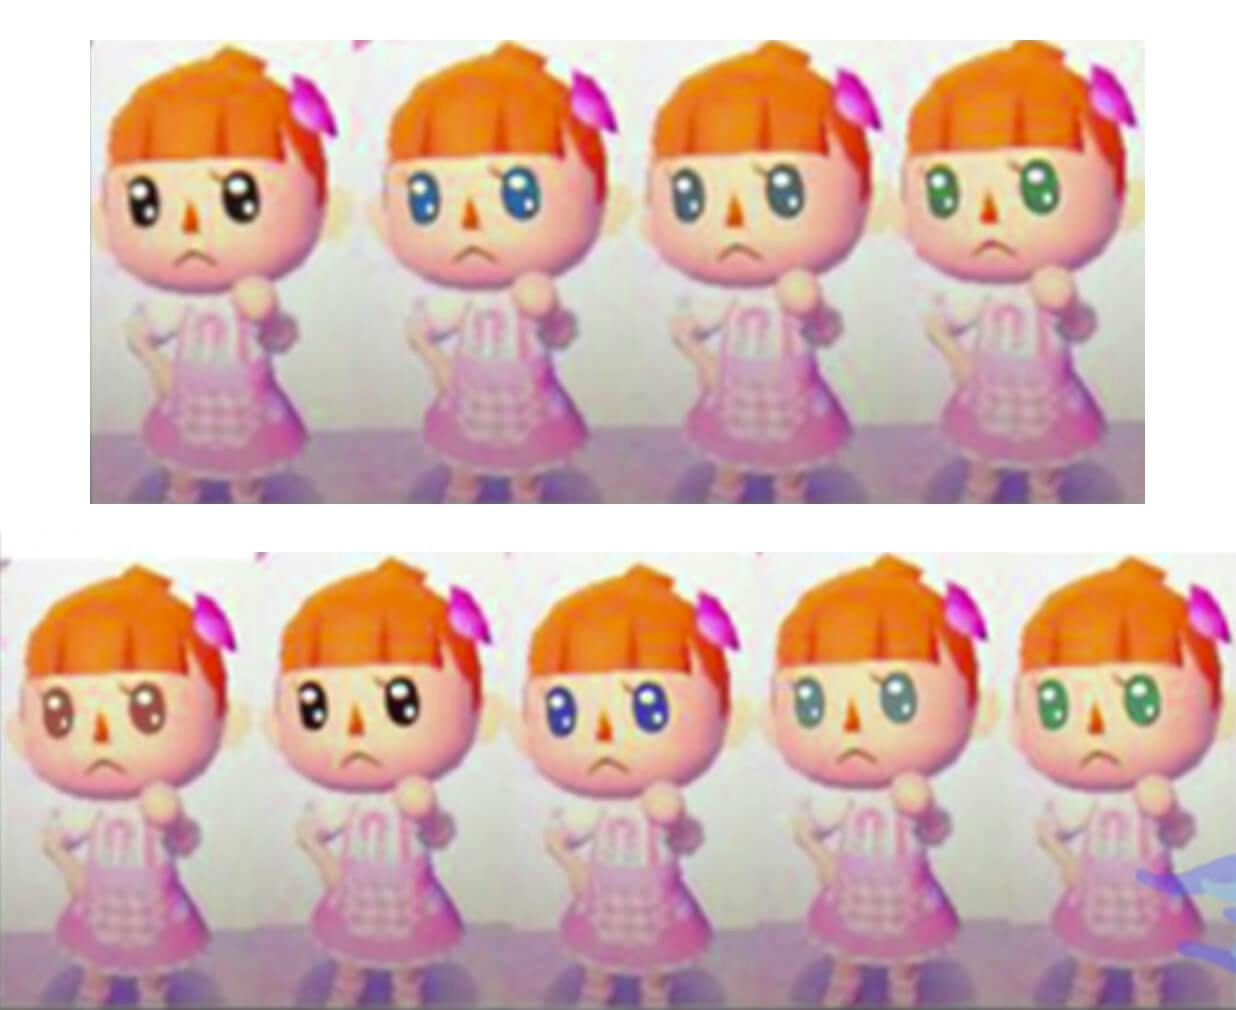 Photo of Animal Crossing: New Leaf that shows the menu for how to change your eye color in the game.